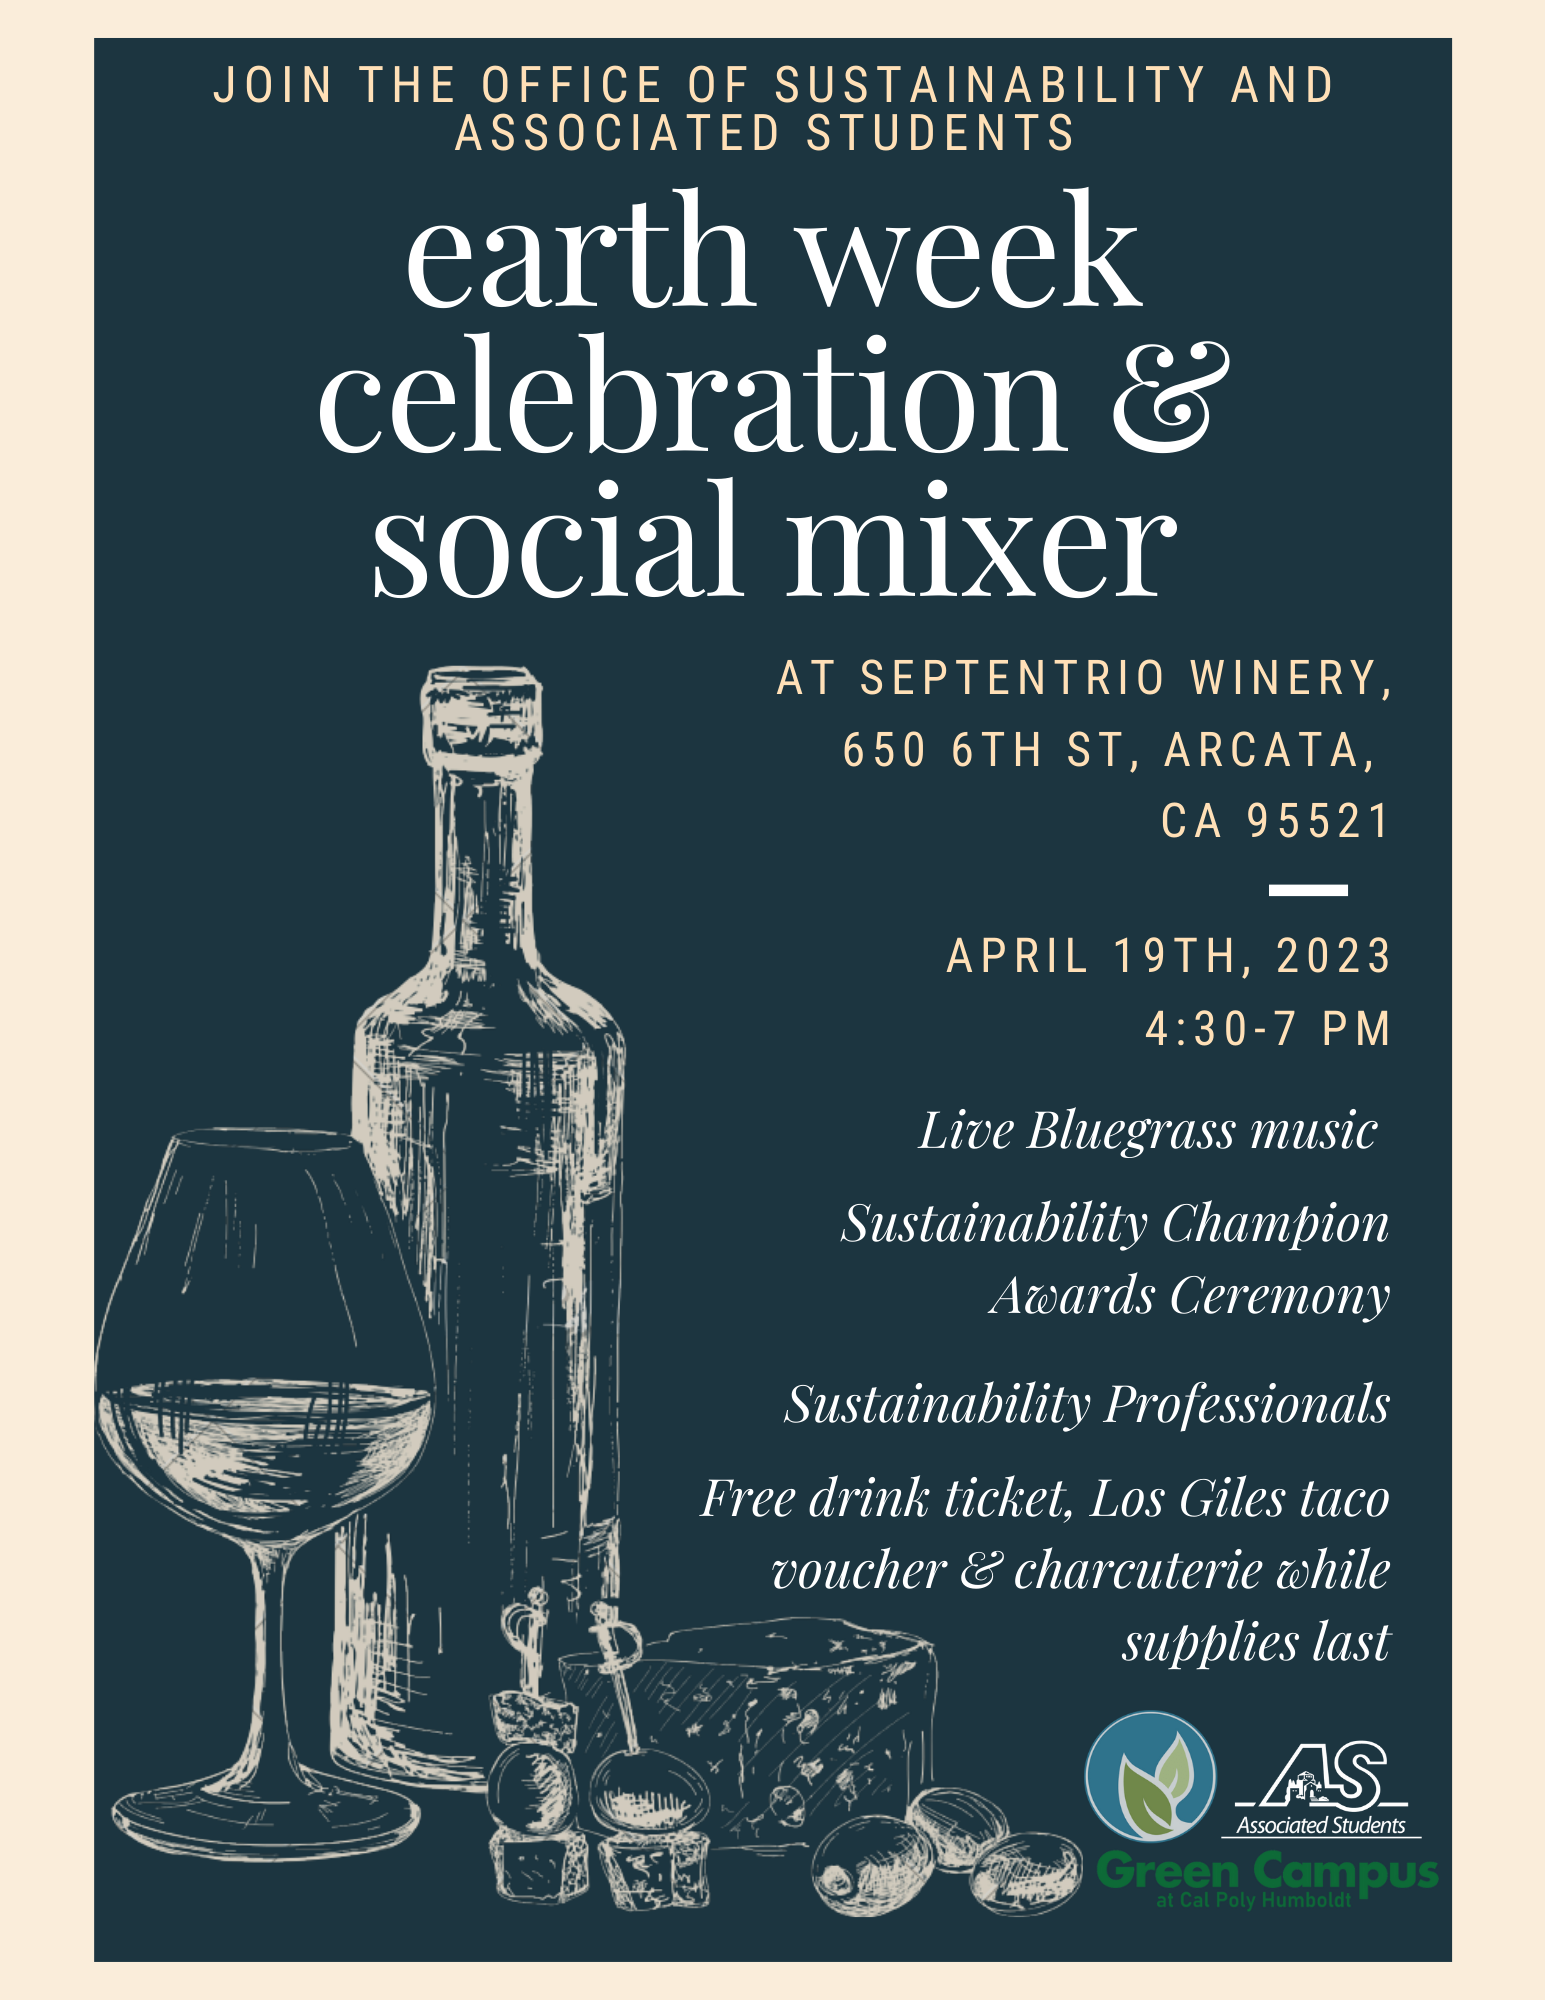 Flyer shows a wine bottle and olives and ice cubes on a navy blue background with the words  Join the office of sustainability and associated students for earth week celebration and social mixer, at Septentrio Winery 650 6th Street Arcata, CA 95521 